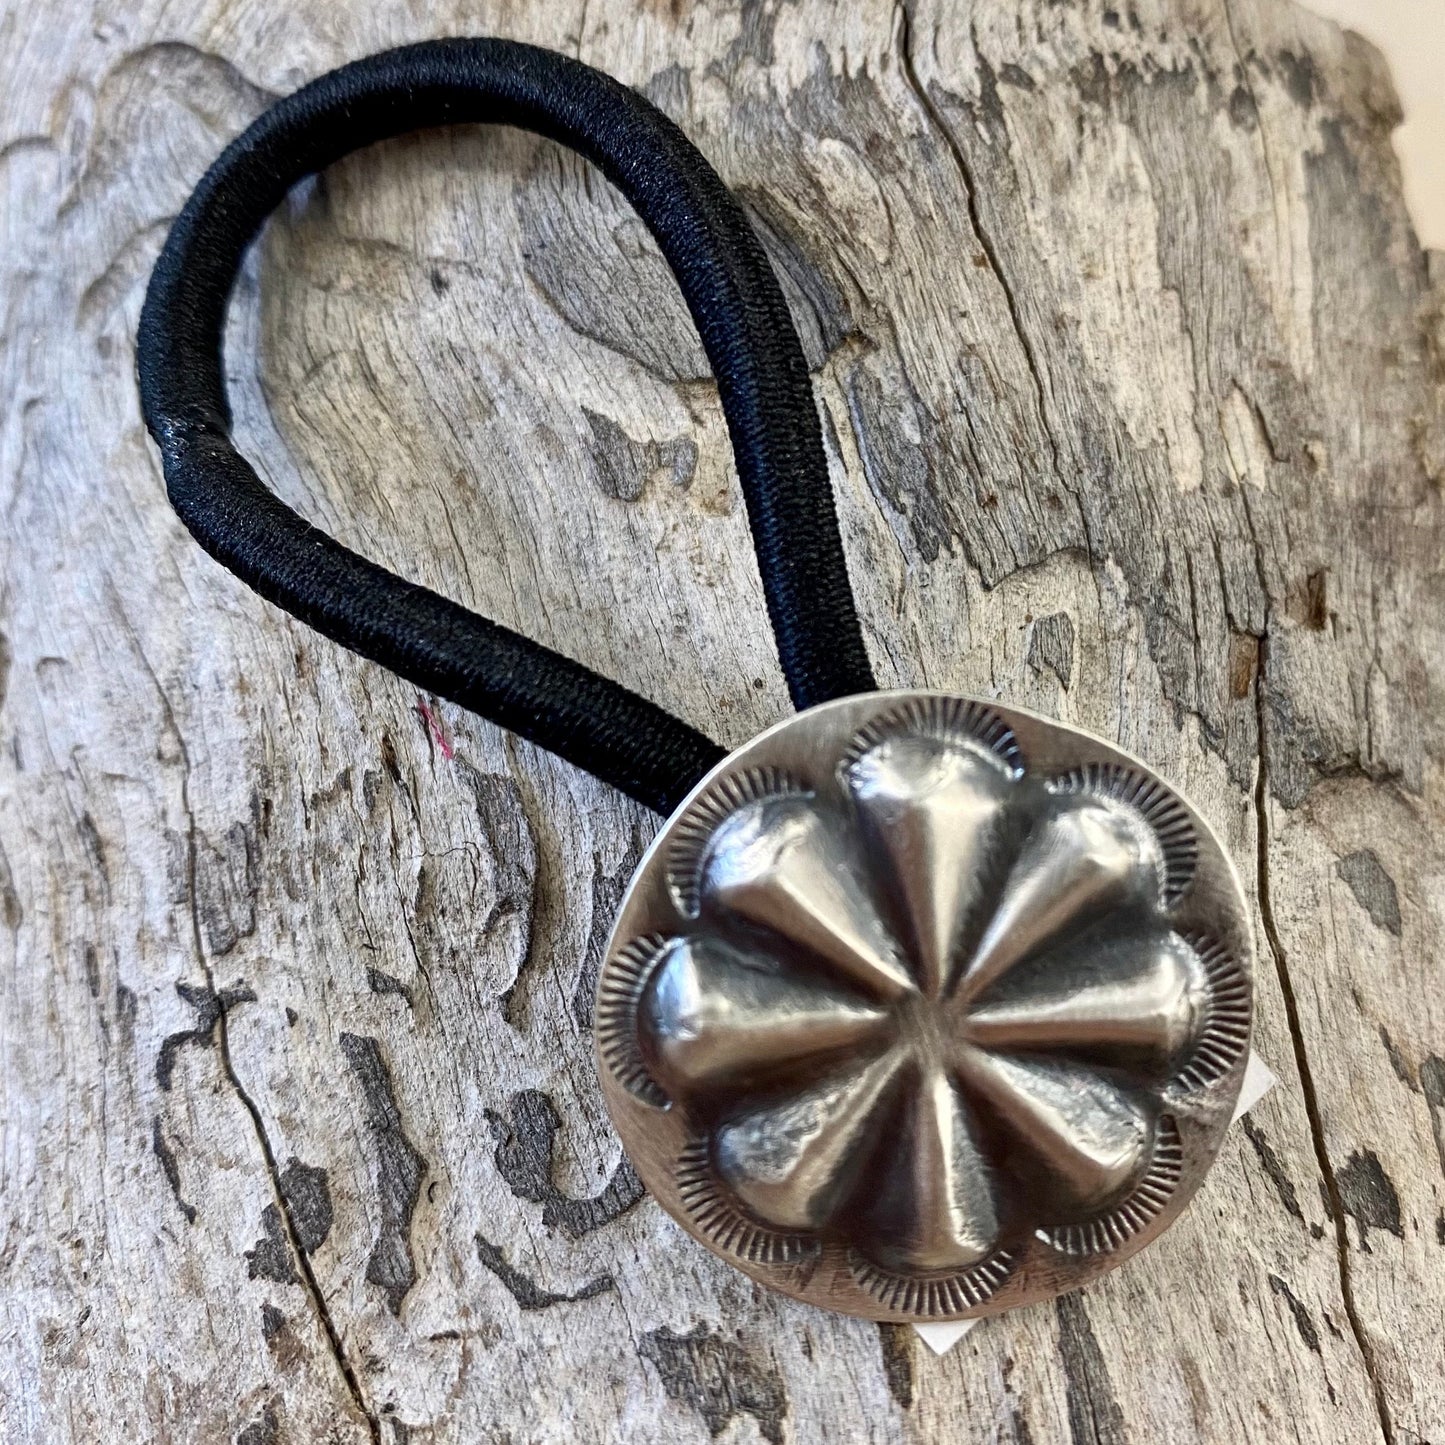 Silver concho style black hair tie. Handmade simple yet striking hair accessory to spice up any hairdo. The perfect addition to any outfit for any occasion. Add it in to your braid or ponytail. Concho hair tie - Western hair tie  - Western Hair Accessories 